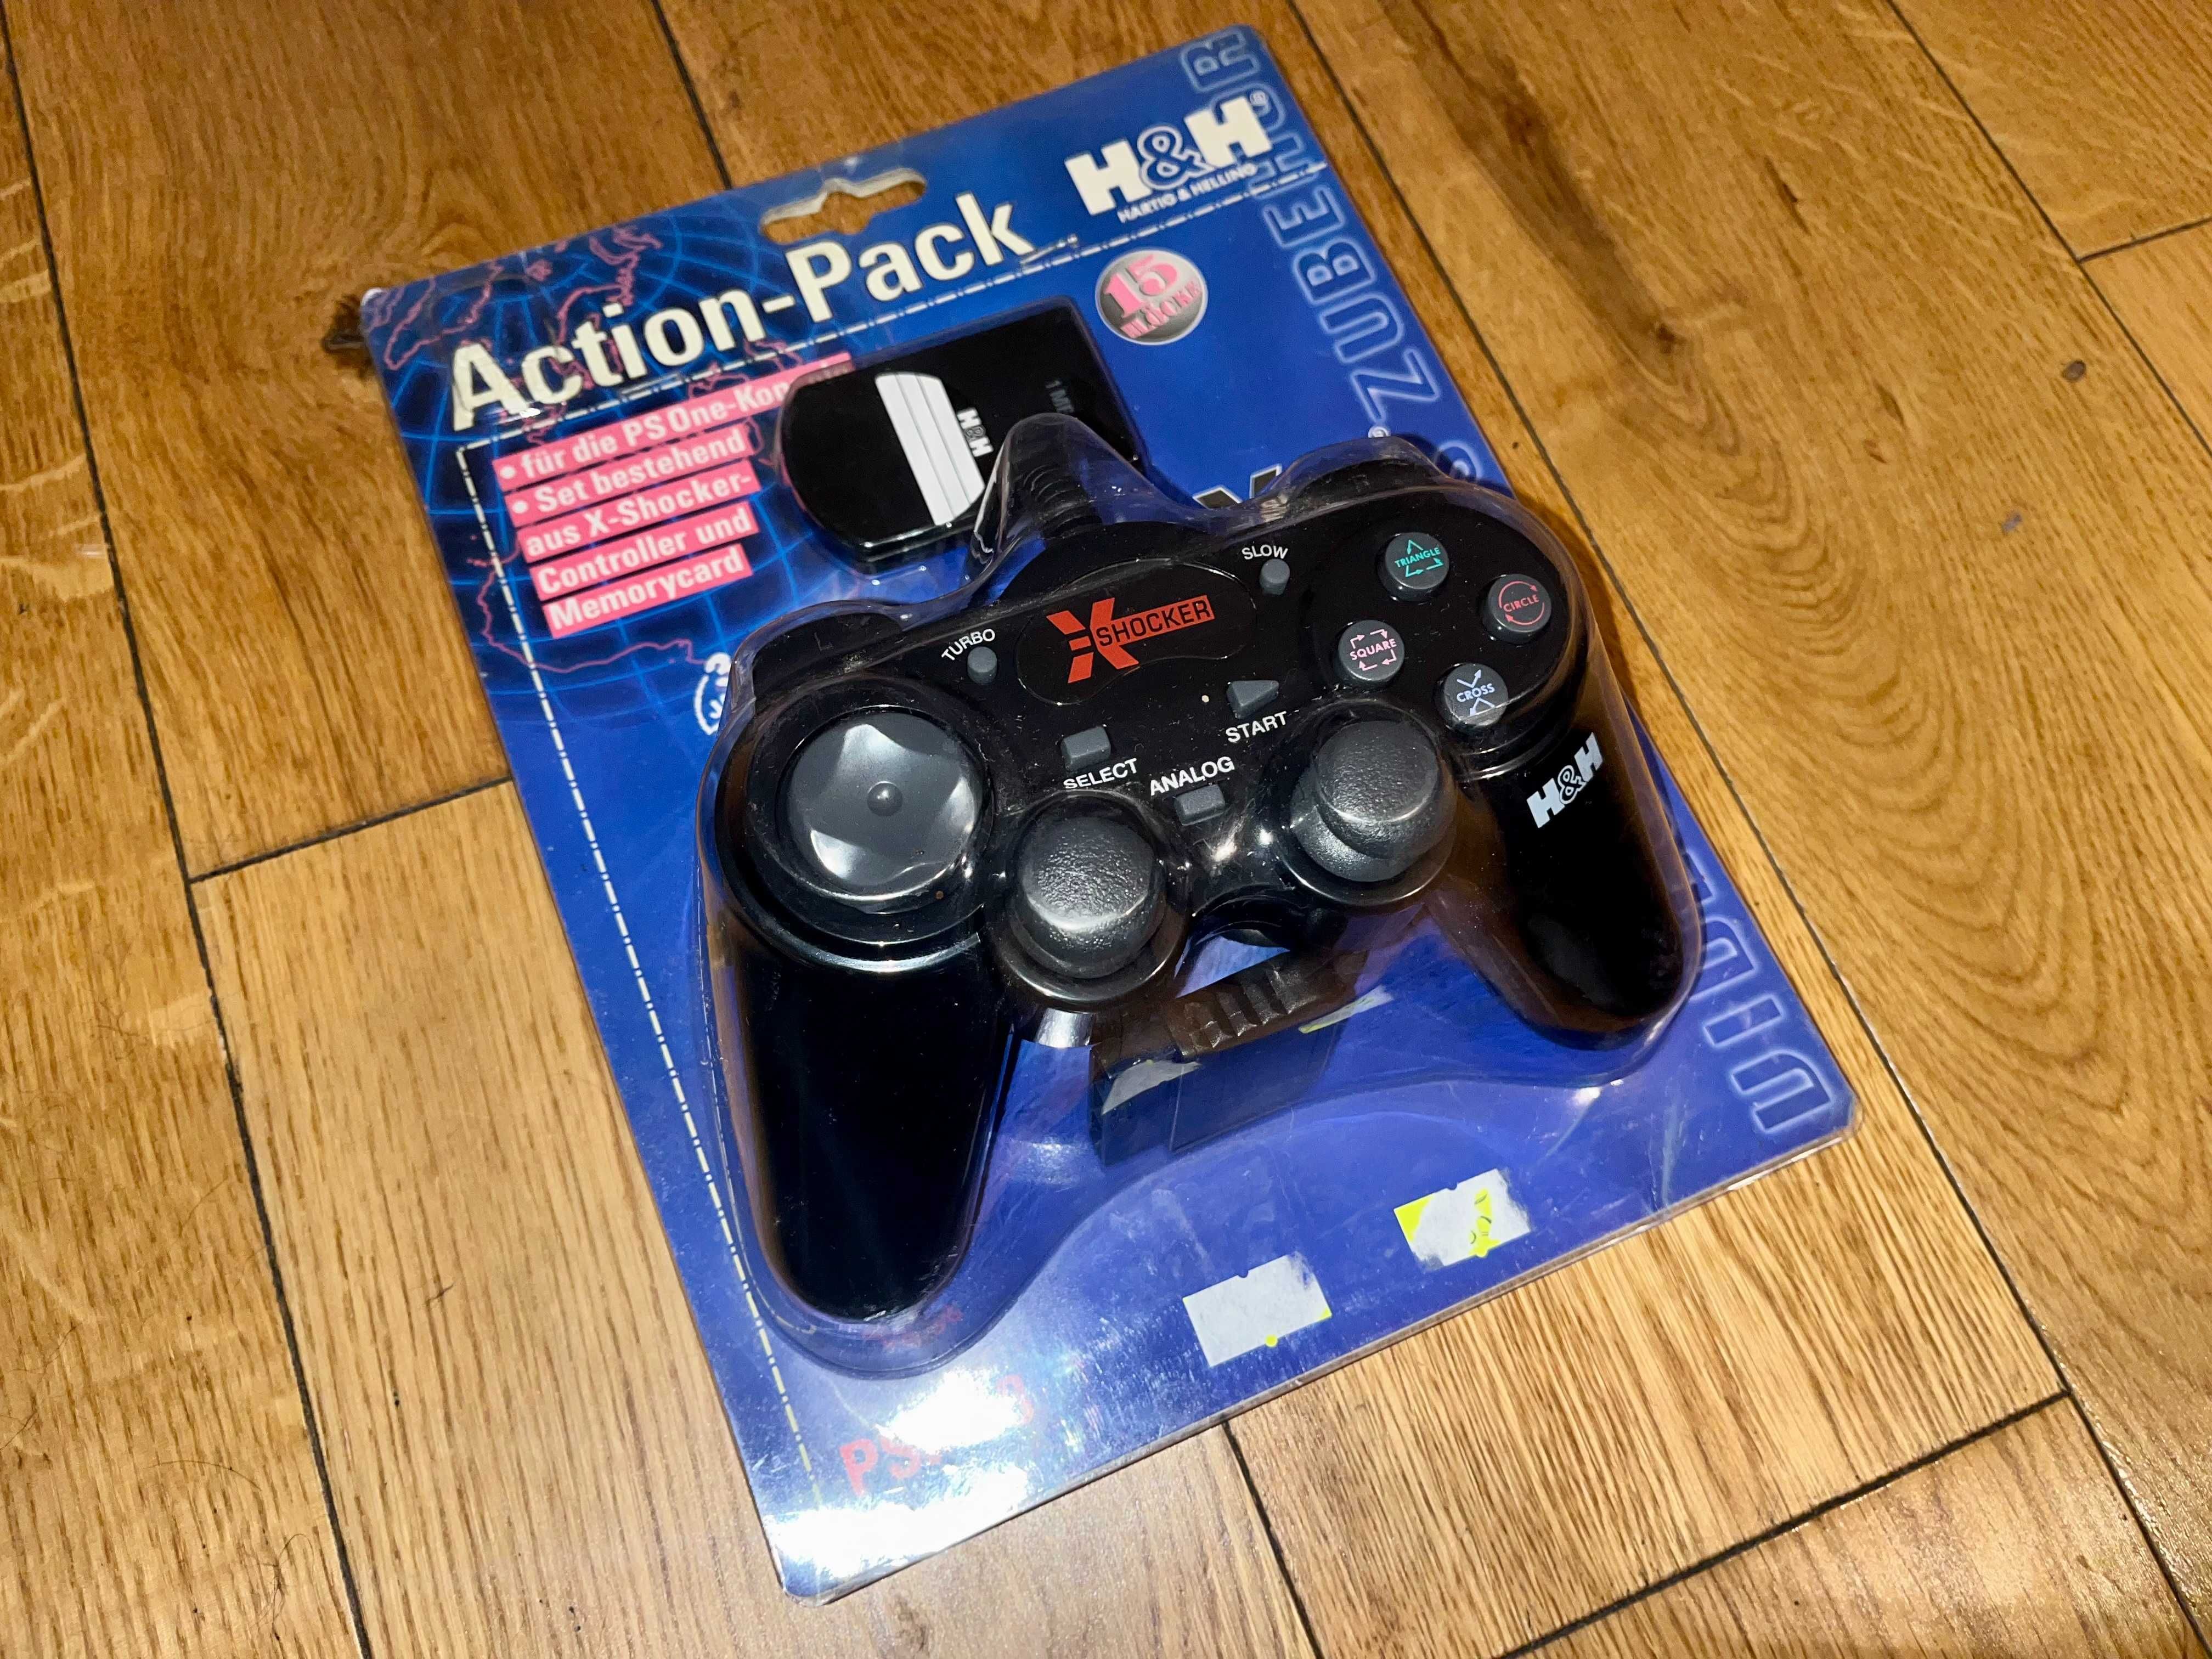 Action-Pack : pad + karta pamięci(komplet) do PS One/PSX